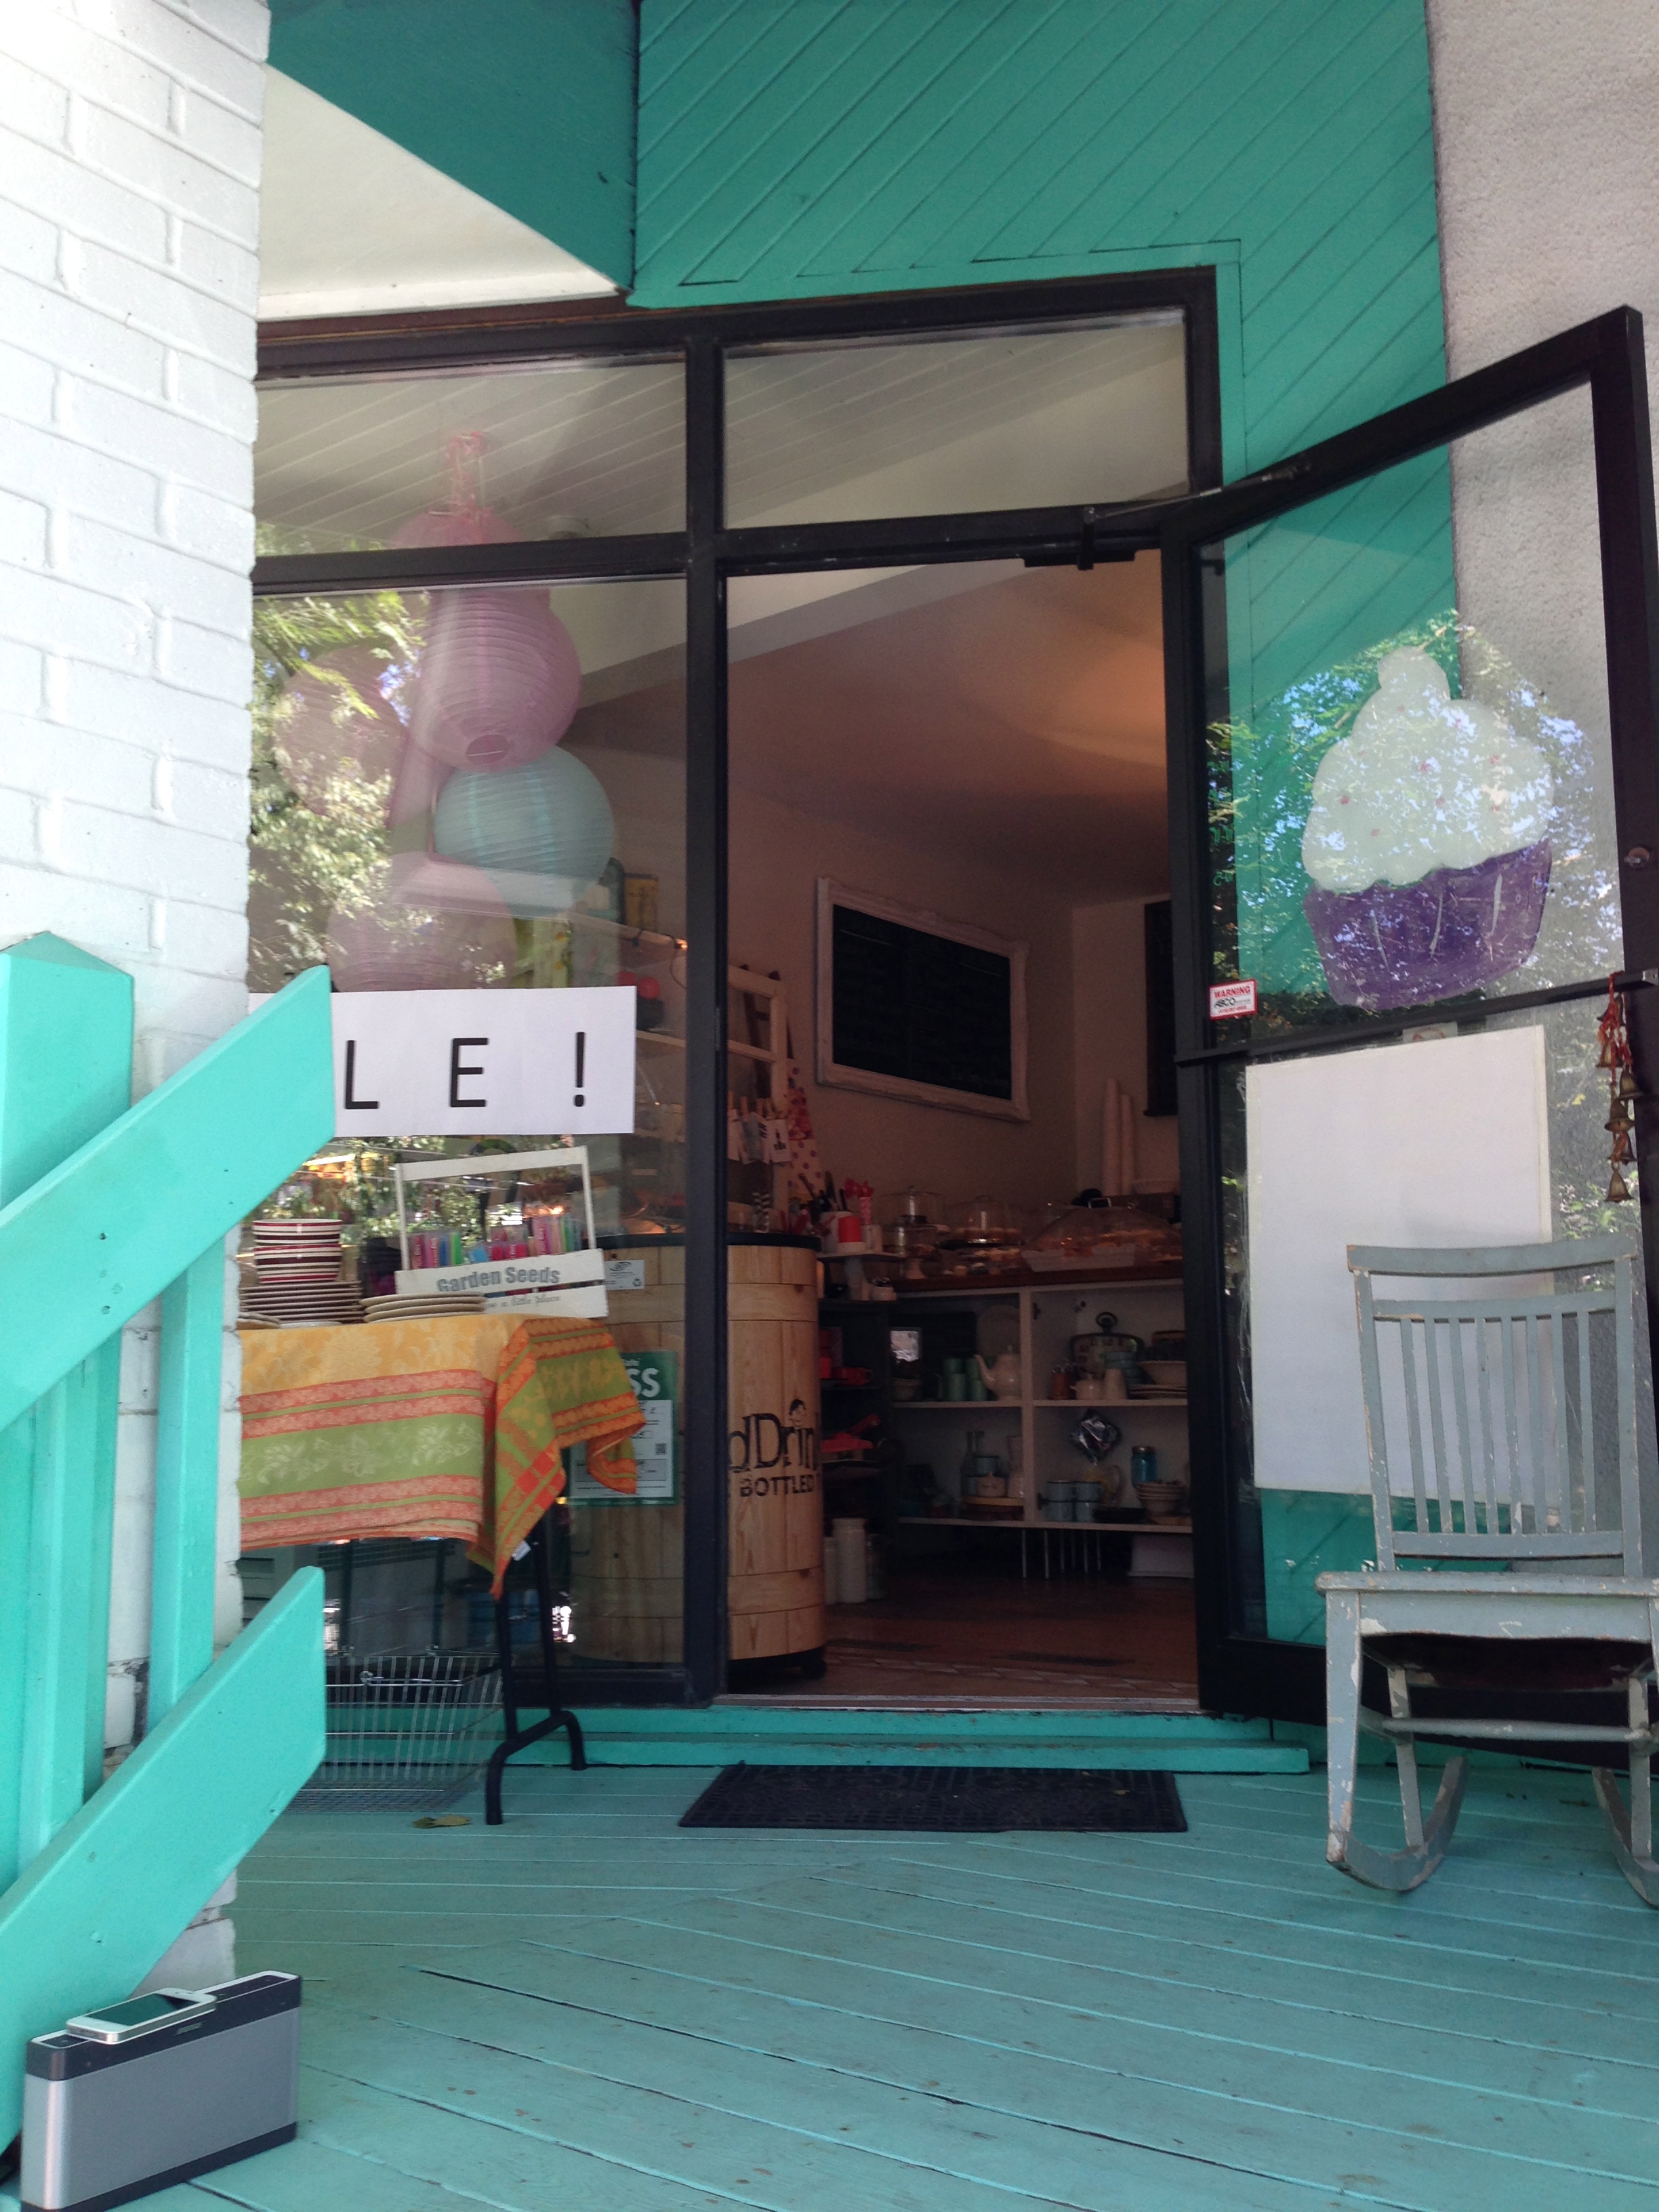 The entrance to the cute Life is Sweet bakery and gift shop.